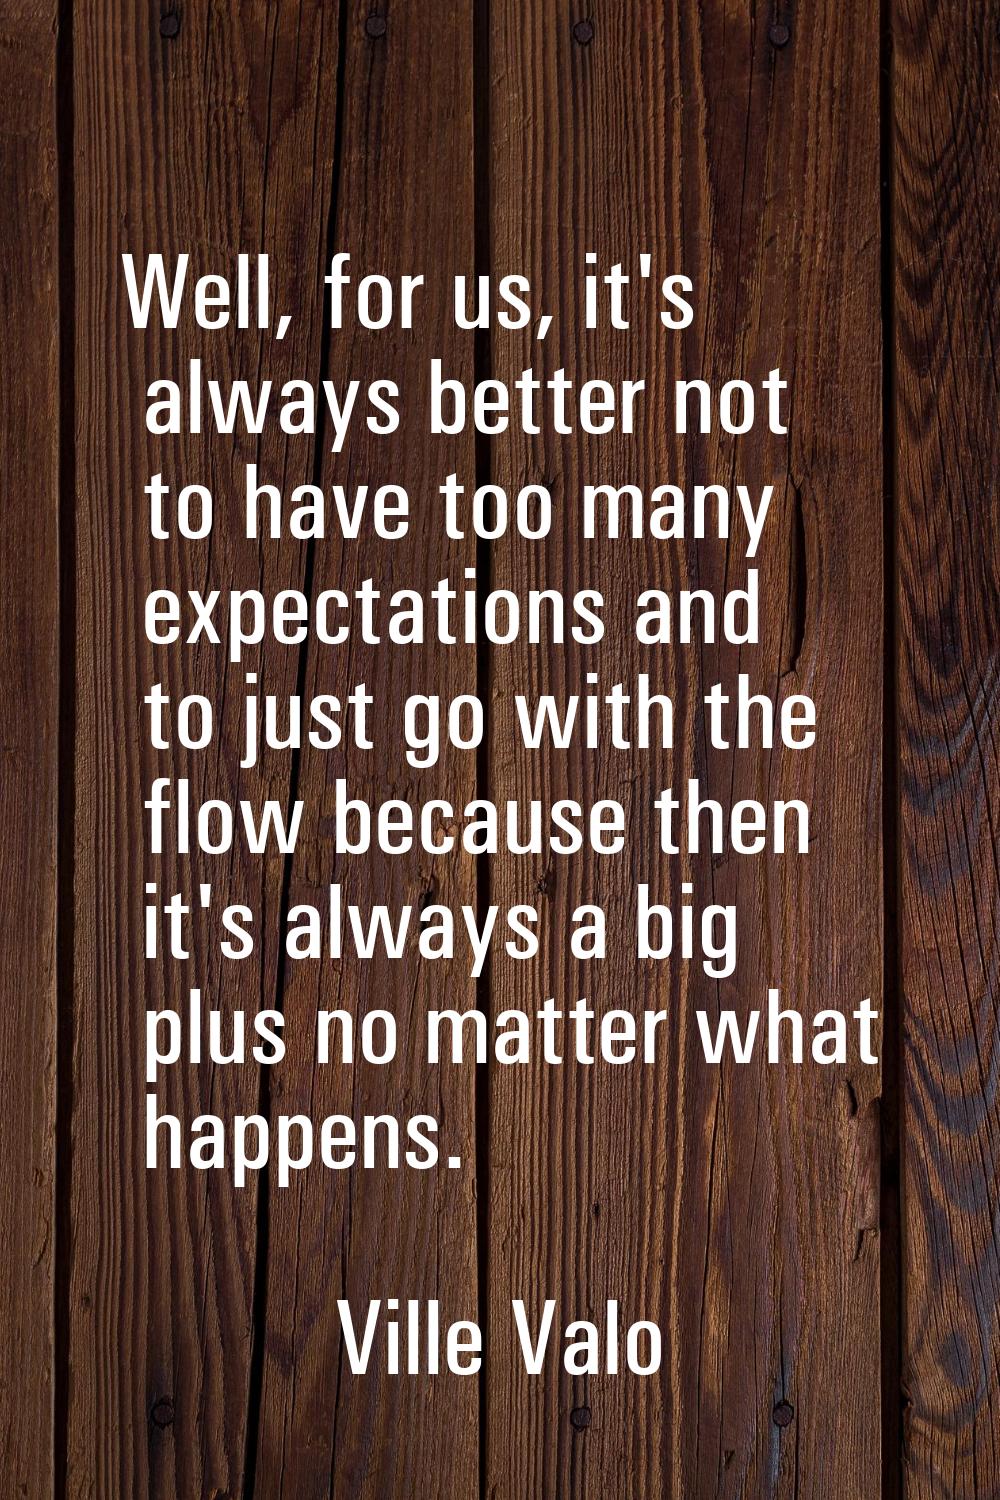 Well, for us, it's always better not to have too many expectations and to just go with the flow bec